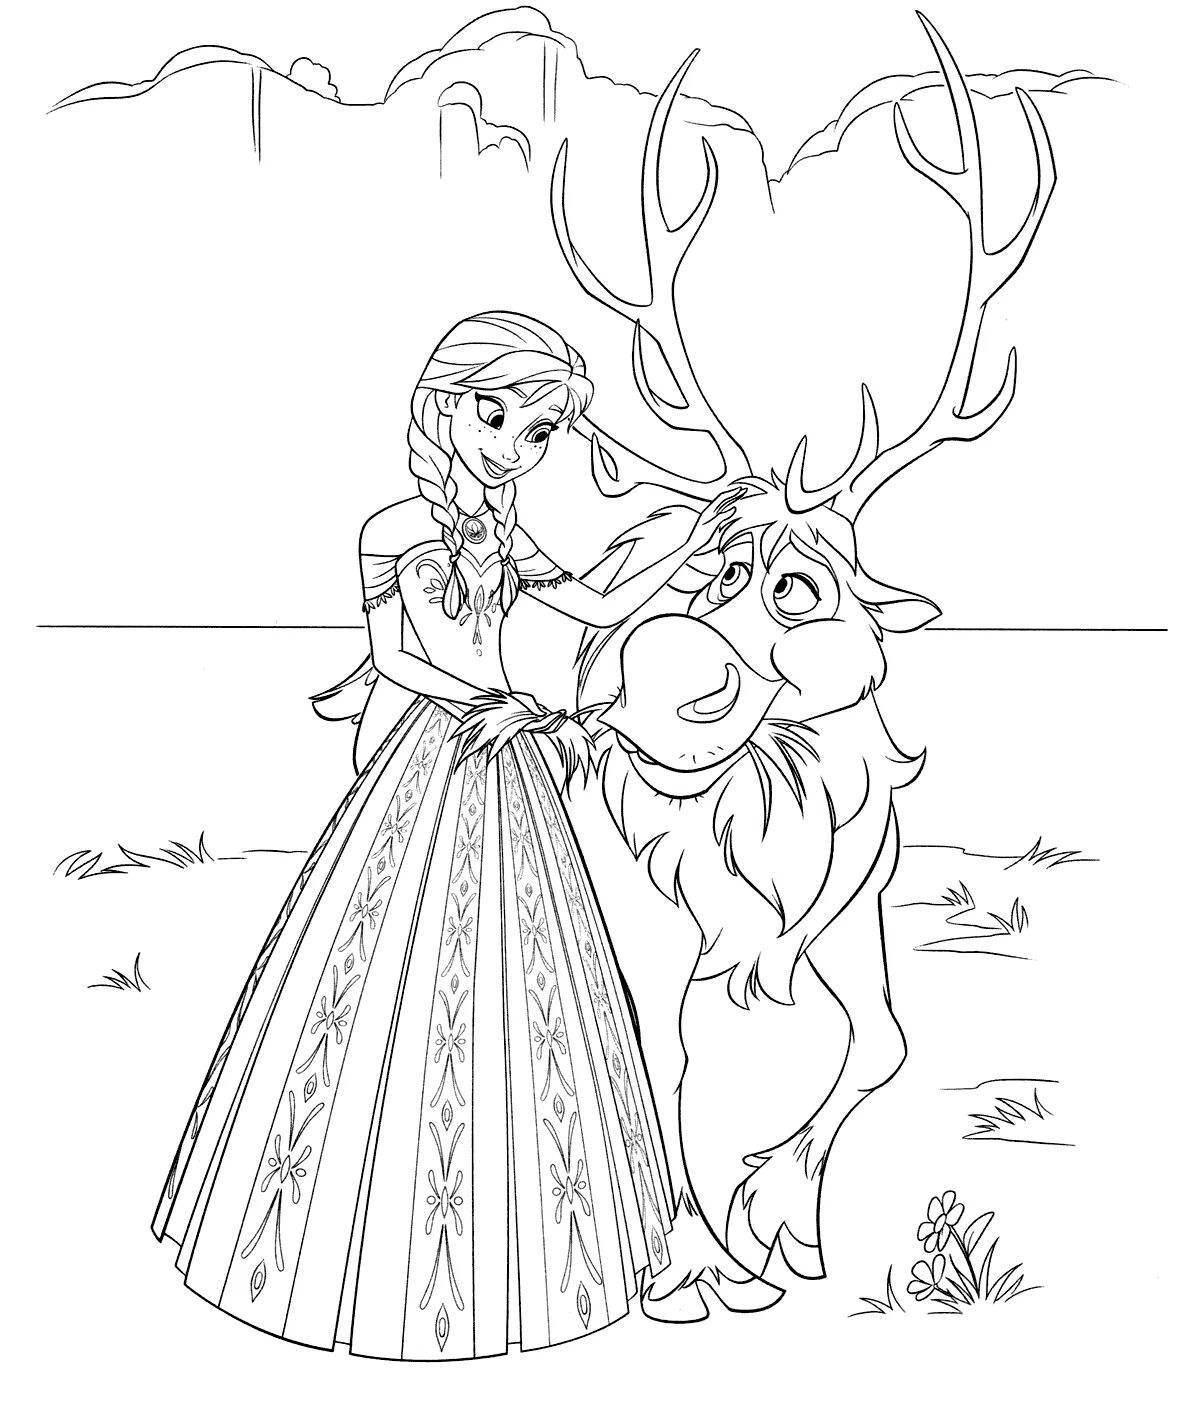 Crazy coloring book frozen 2 for girls